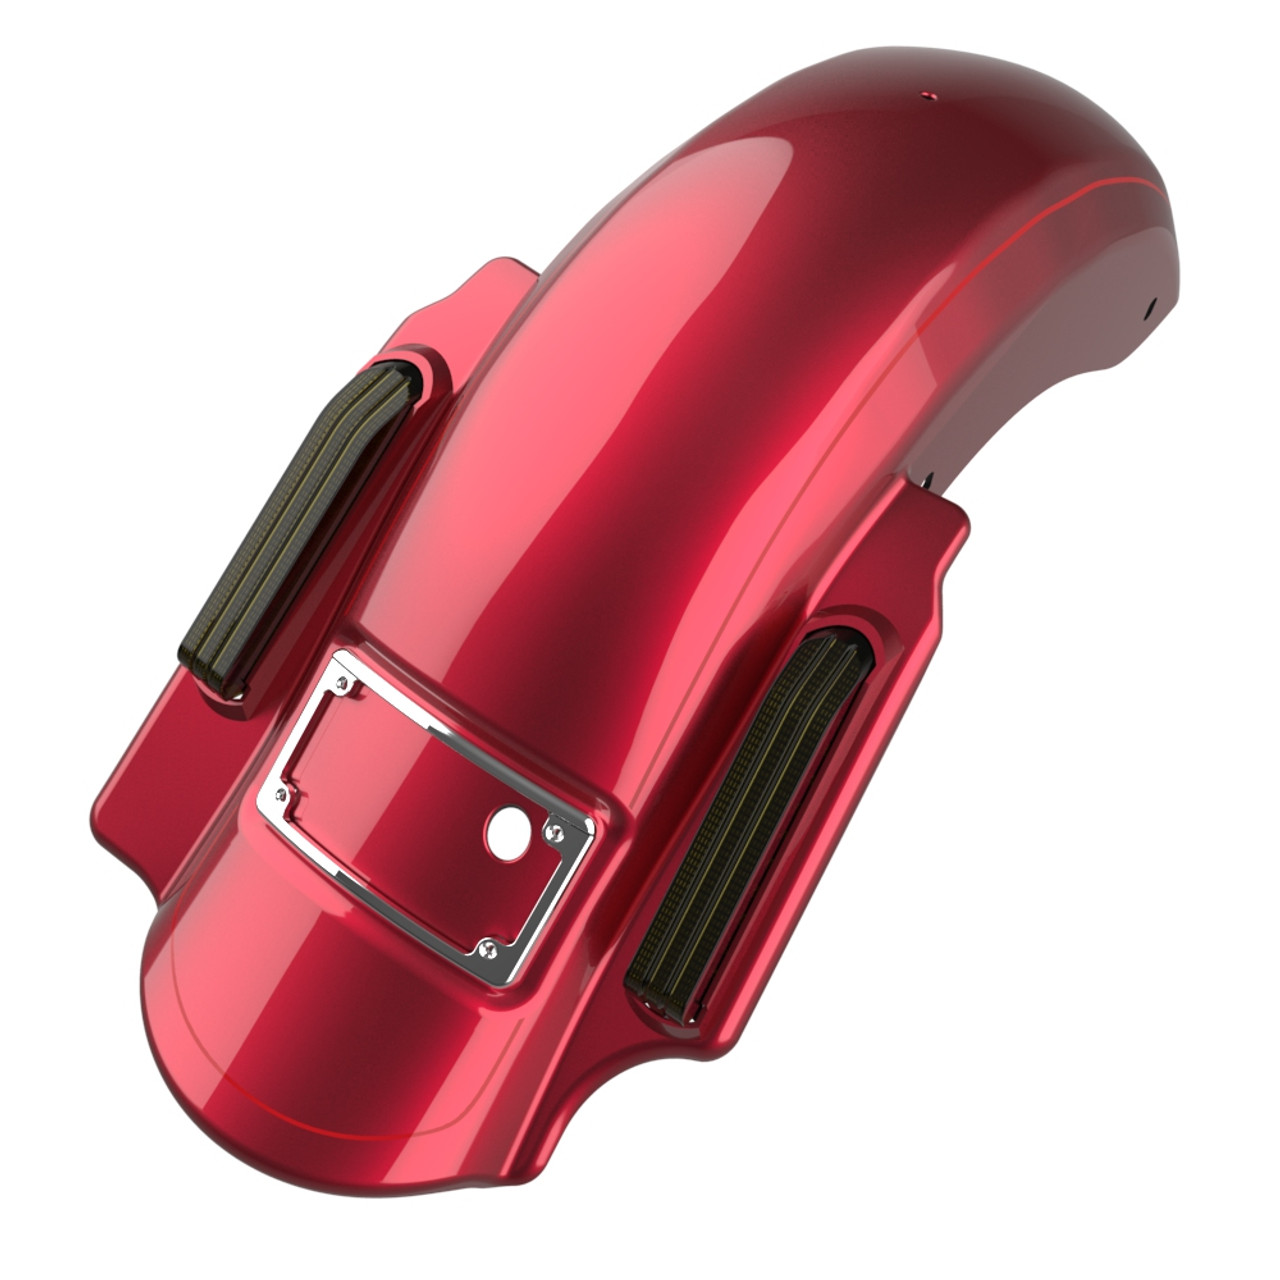 Advanblack  Dominator Stretched Rear Fender For 2014+ Harley Davidson Touring Models-Velocity Red Sunglo (with Burgundy?